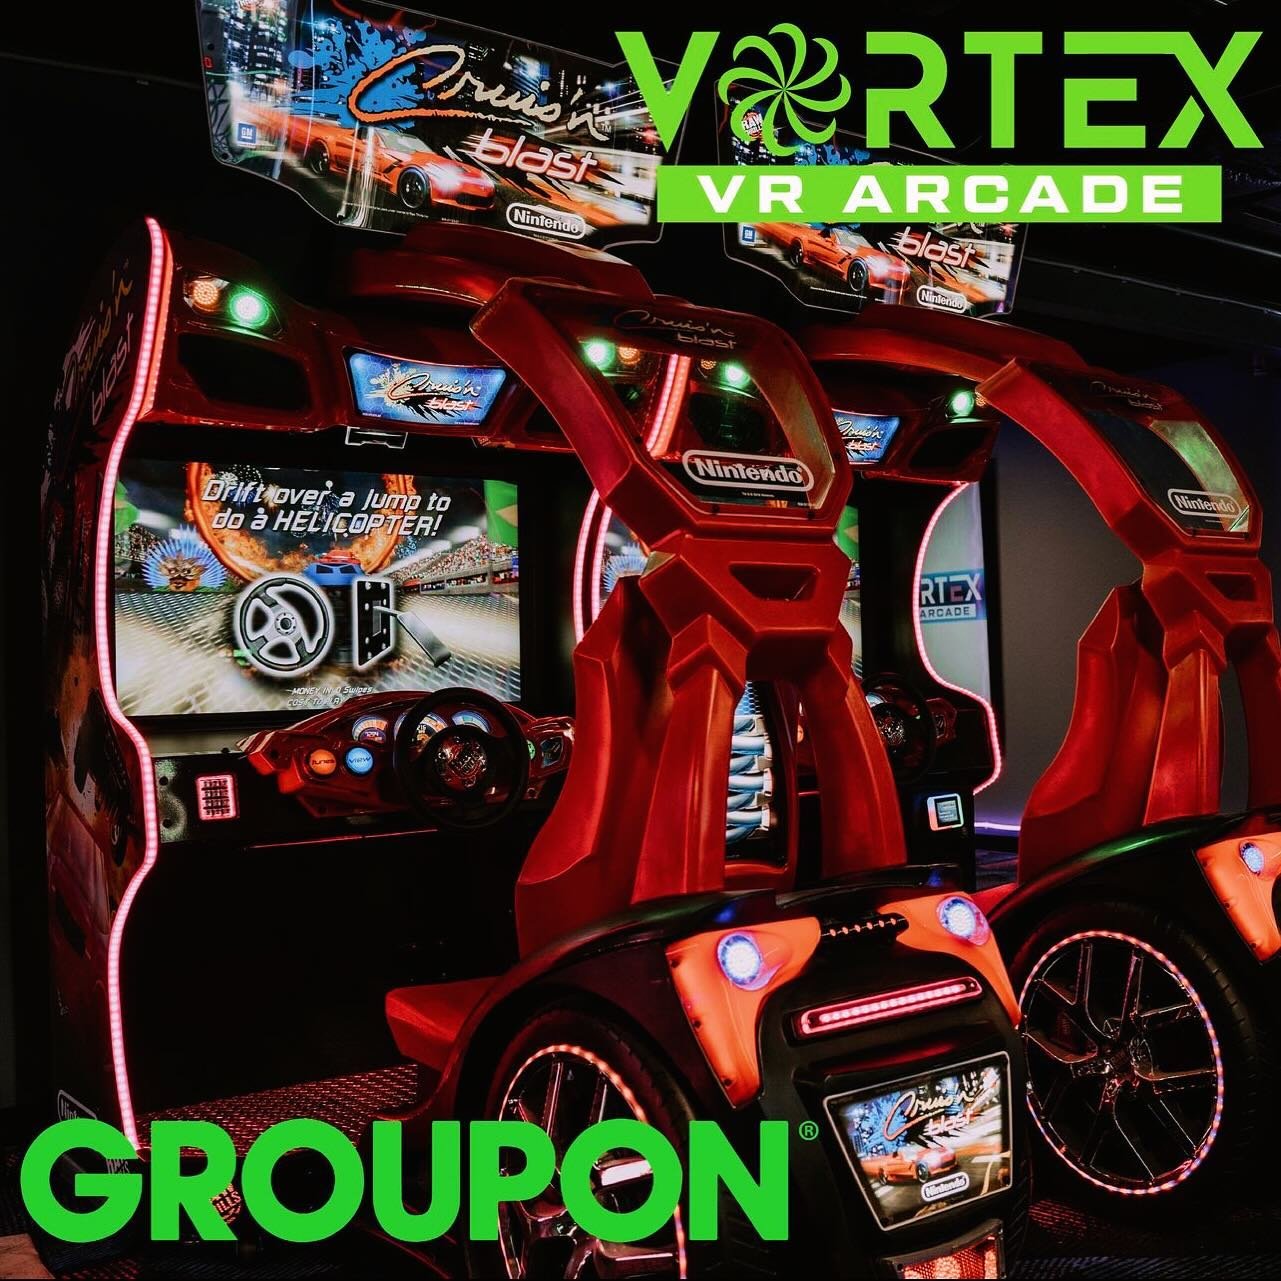 ‼️Don&rsquo;t miss out on unbeatable deals via Groupon for an unforgettable experience at Vortex VR Arcade. Open every weekday 3-9pm! Get ready to escape reality and explore new dimensions‼️
-
-
-

#arcade #arcadegames #videogames #retrogaming #retro